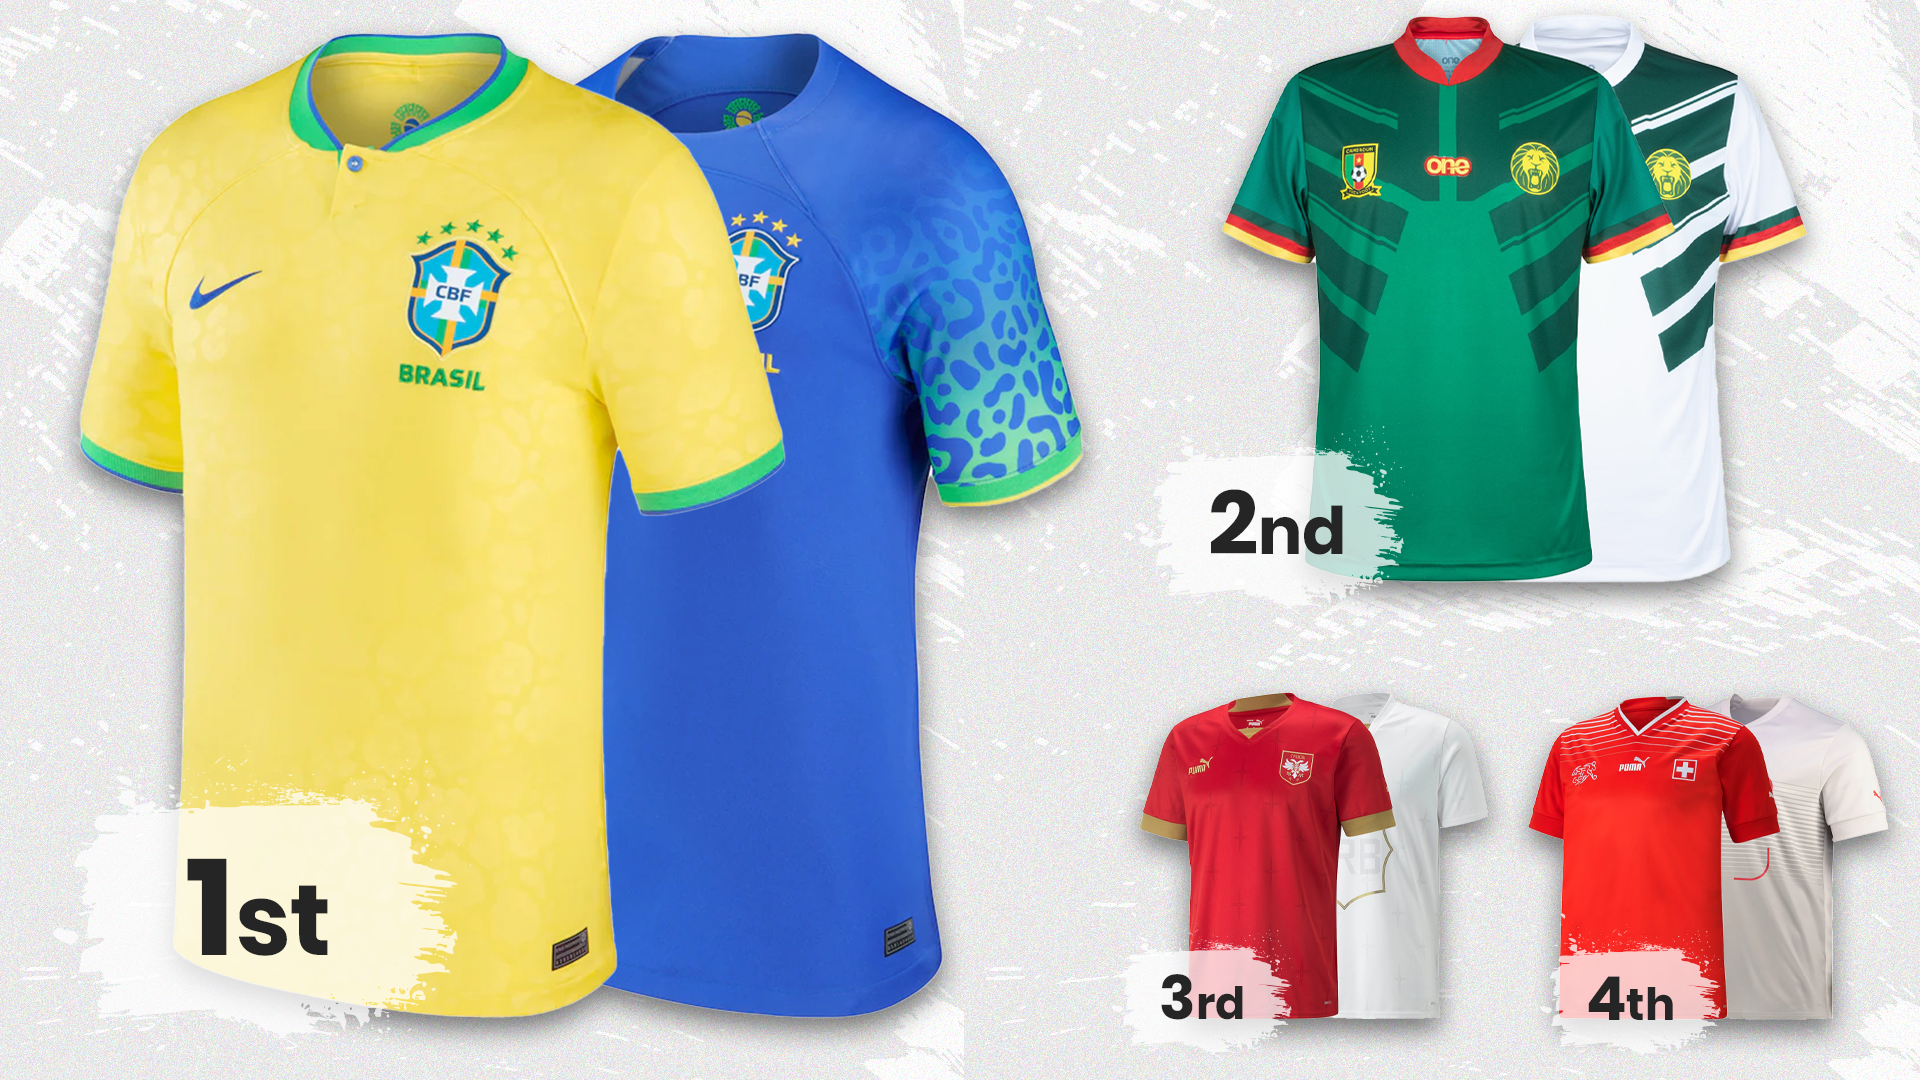 Here is our World Cup 2022 jersey ranking